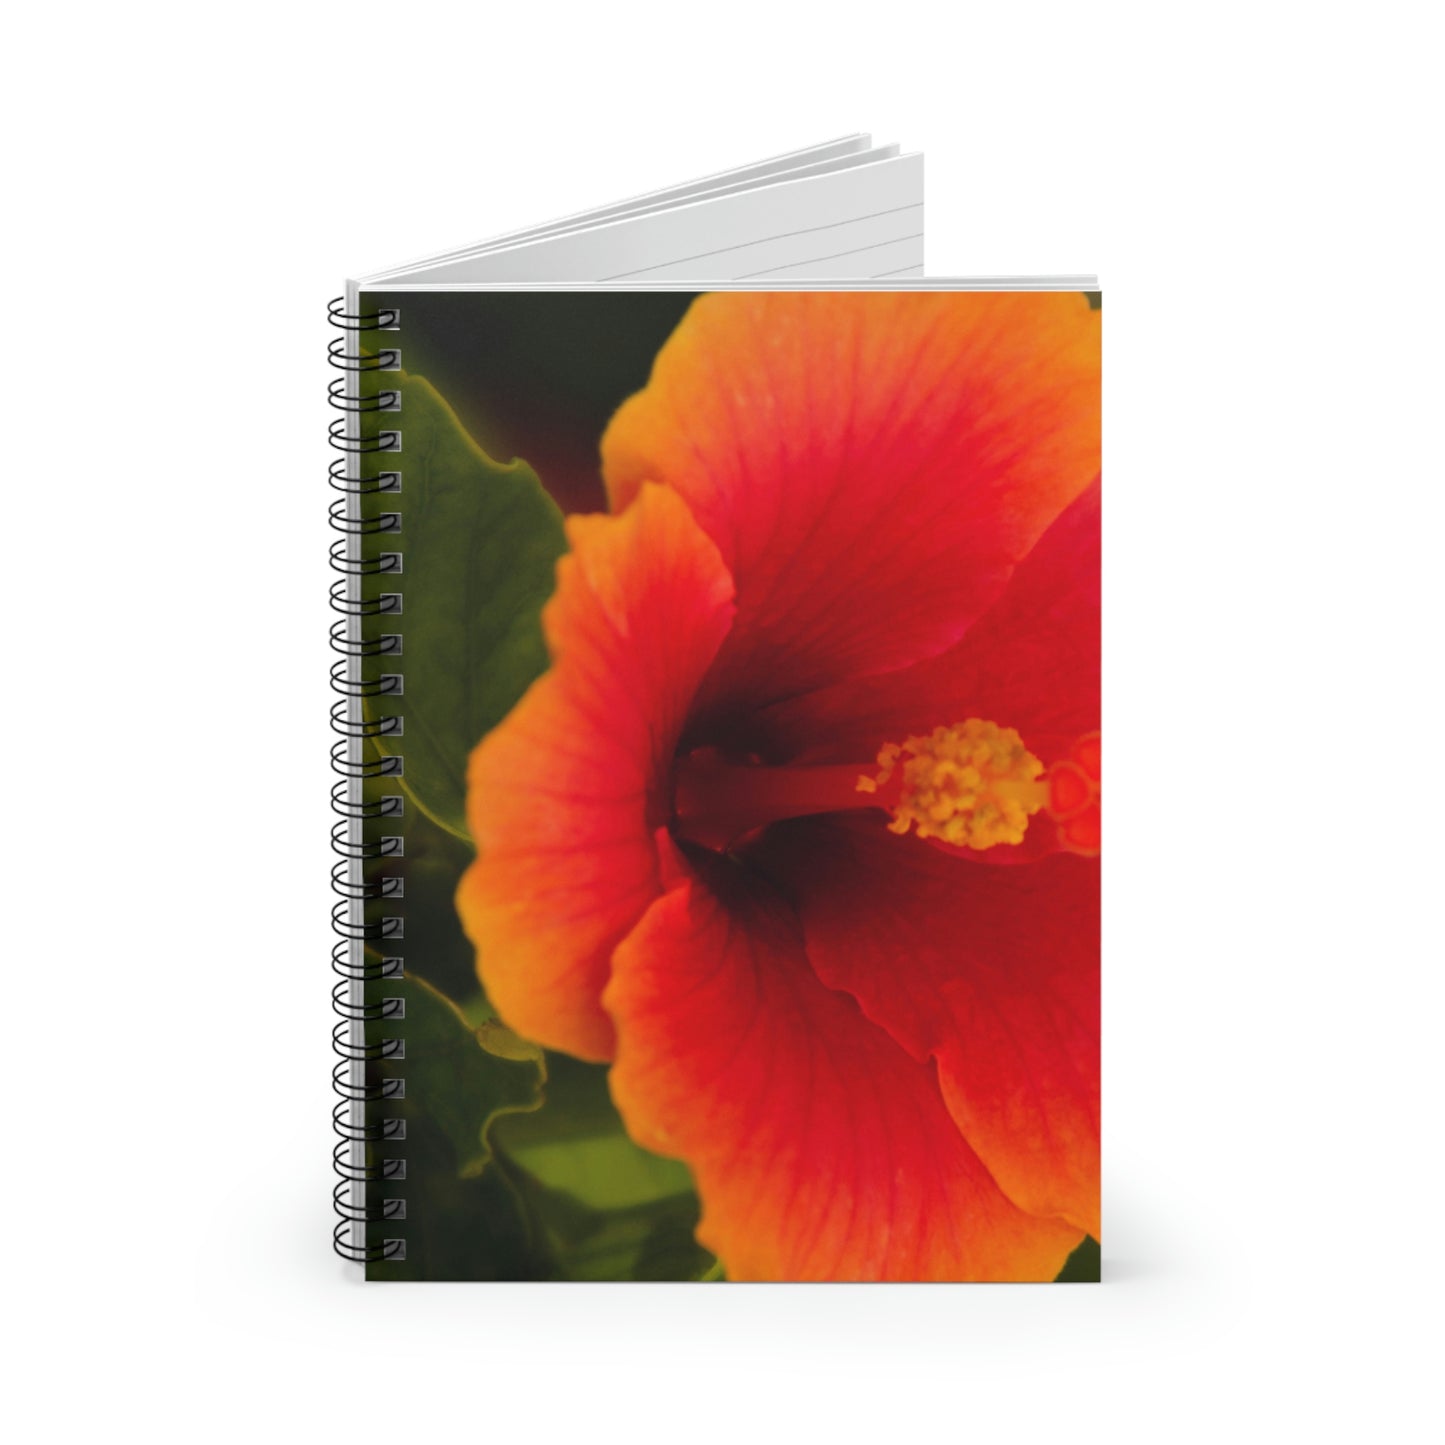 Flowers 31 Spiral Notebook - Ruled Line